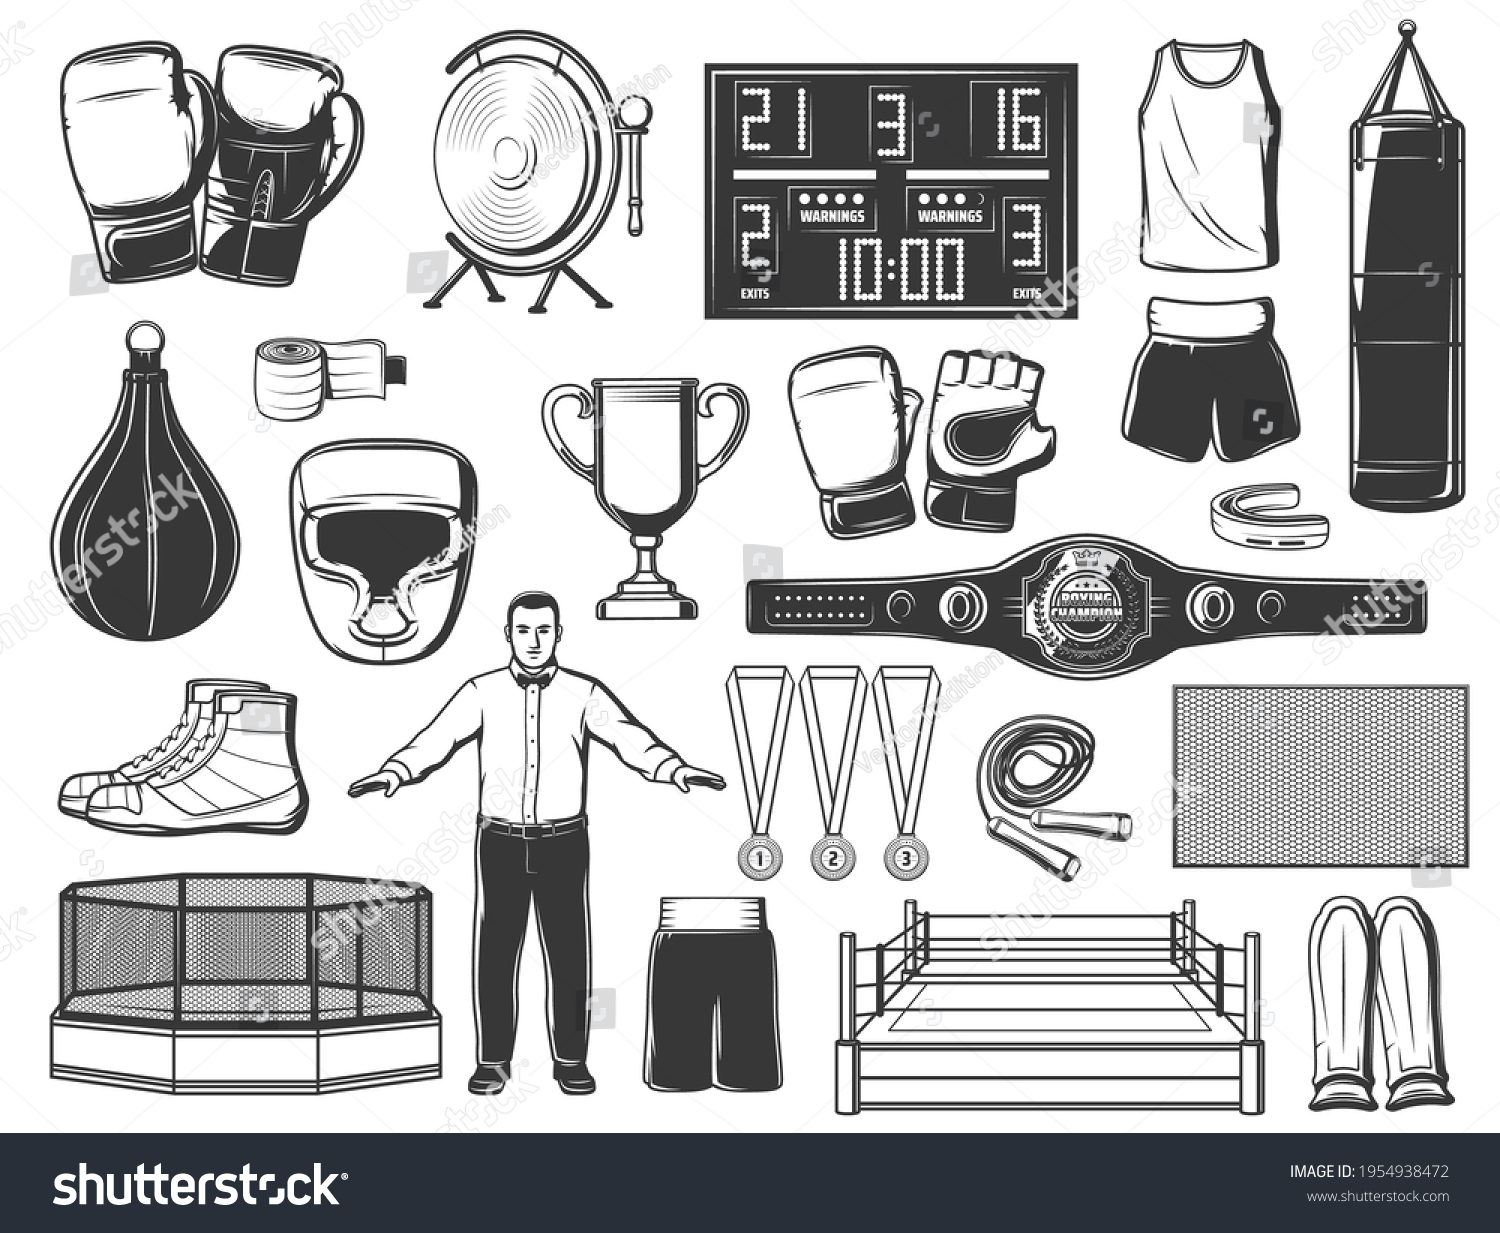 SVG of Boxing, mma and kickboxing sport vector icons. Boxer gloves, punching bags, rings and championship belt, helmet and shorts, jersey and shoes, mouth guard, wrist wrap, trophy cup and score board svg